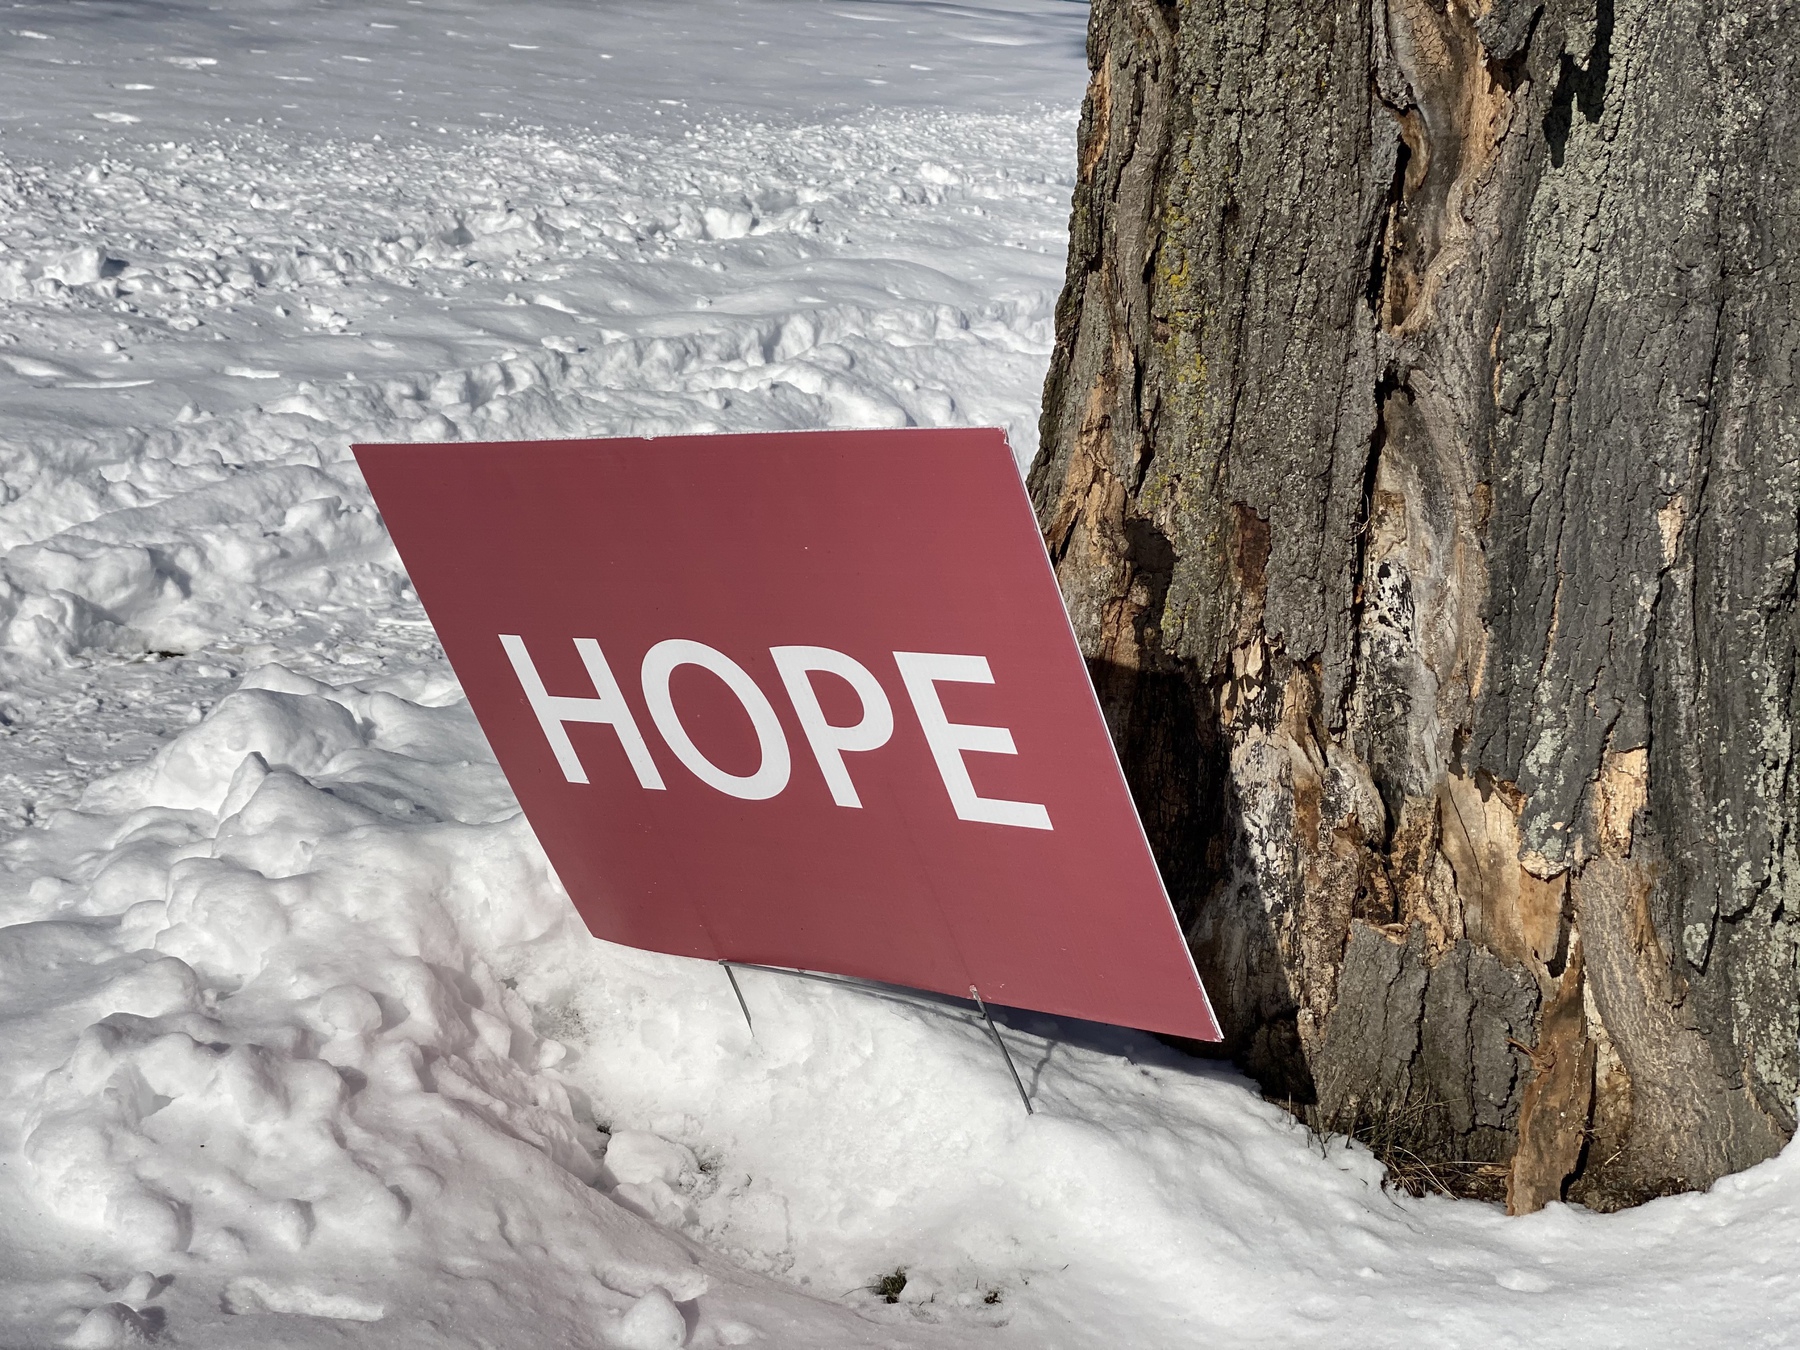 View of a small red sign saying “Hope” next to a tree trunk in the snow.